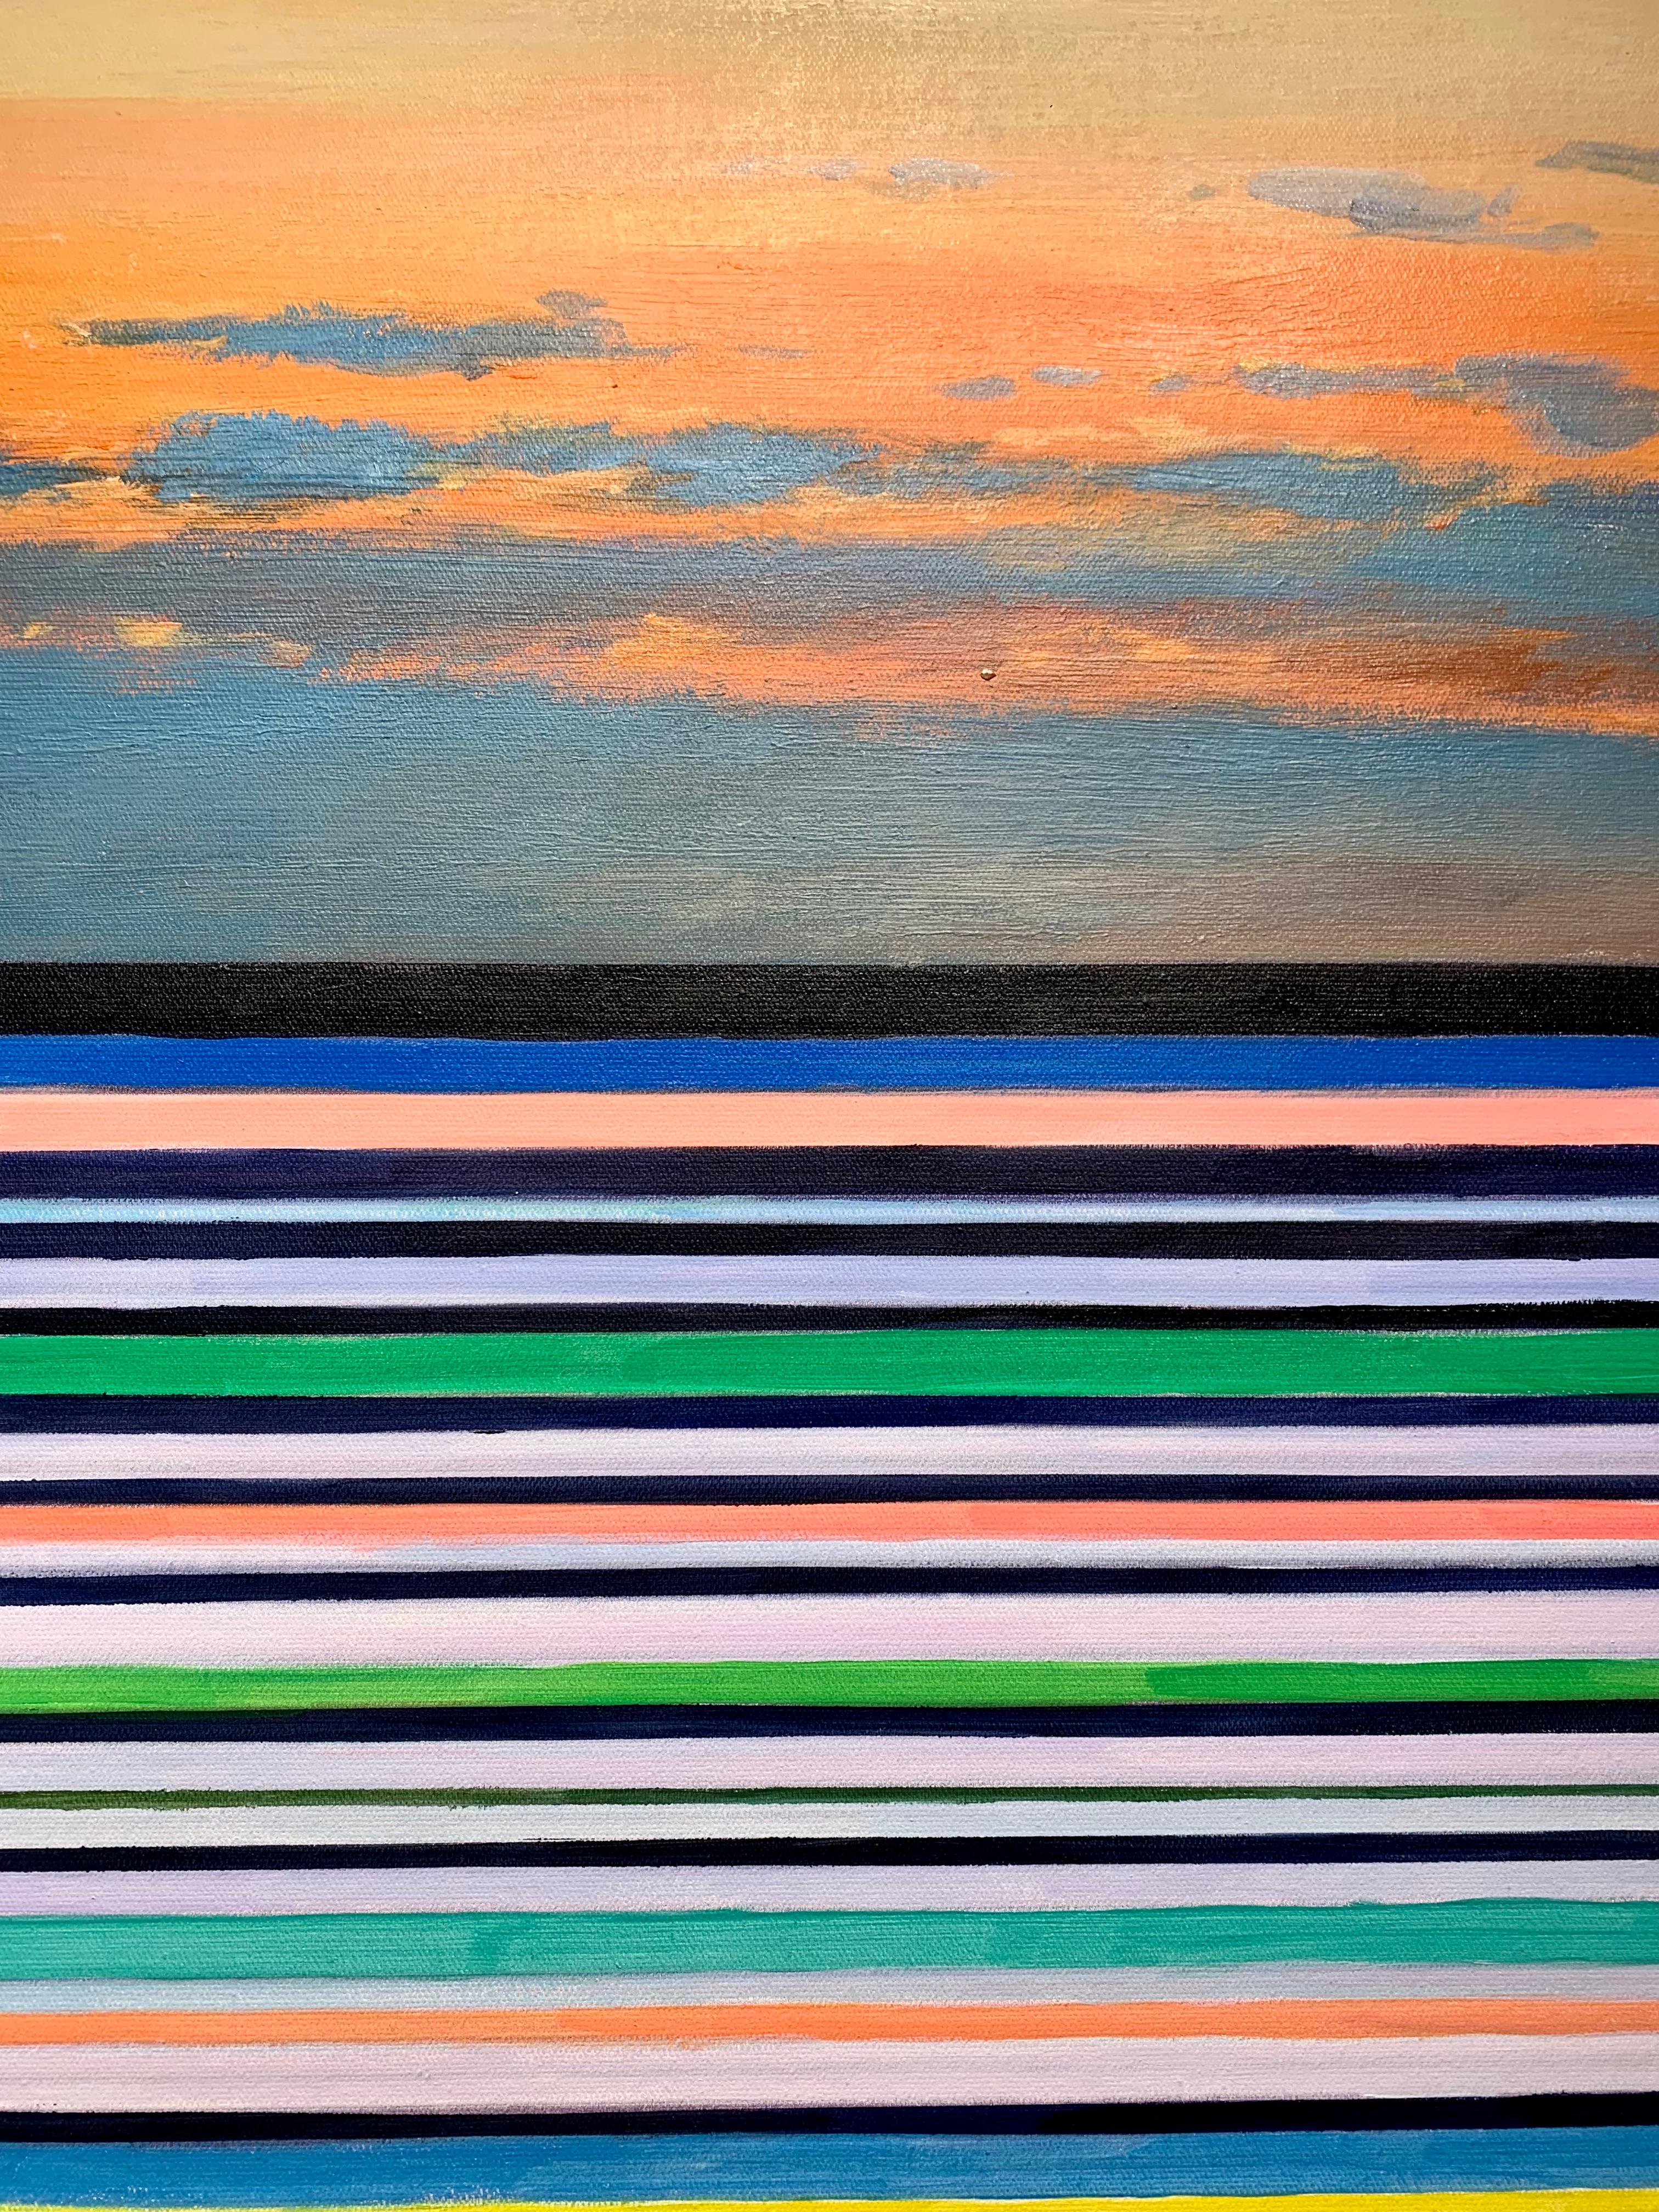 Horizon by Kate Seaborne - contemporary seascape painting Blue Ocean 8